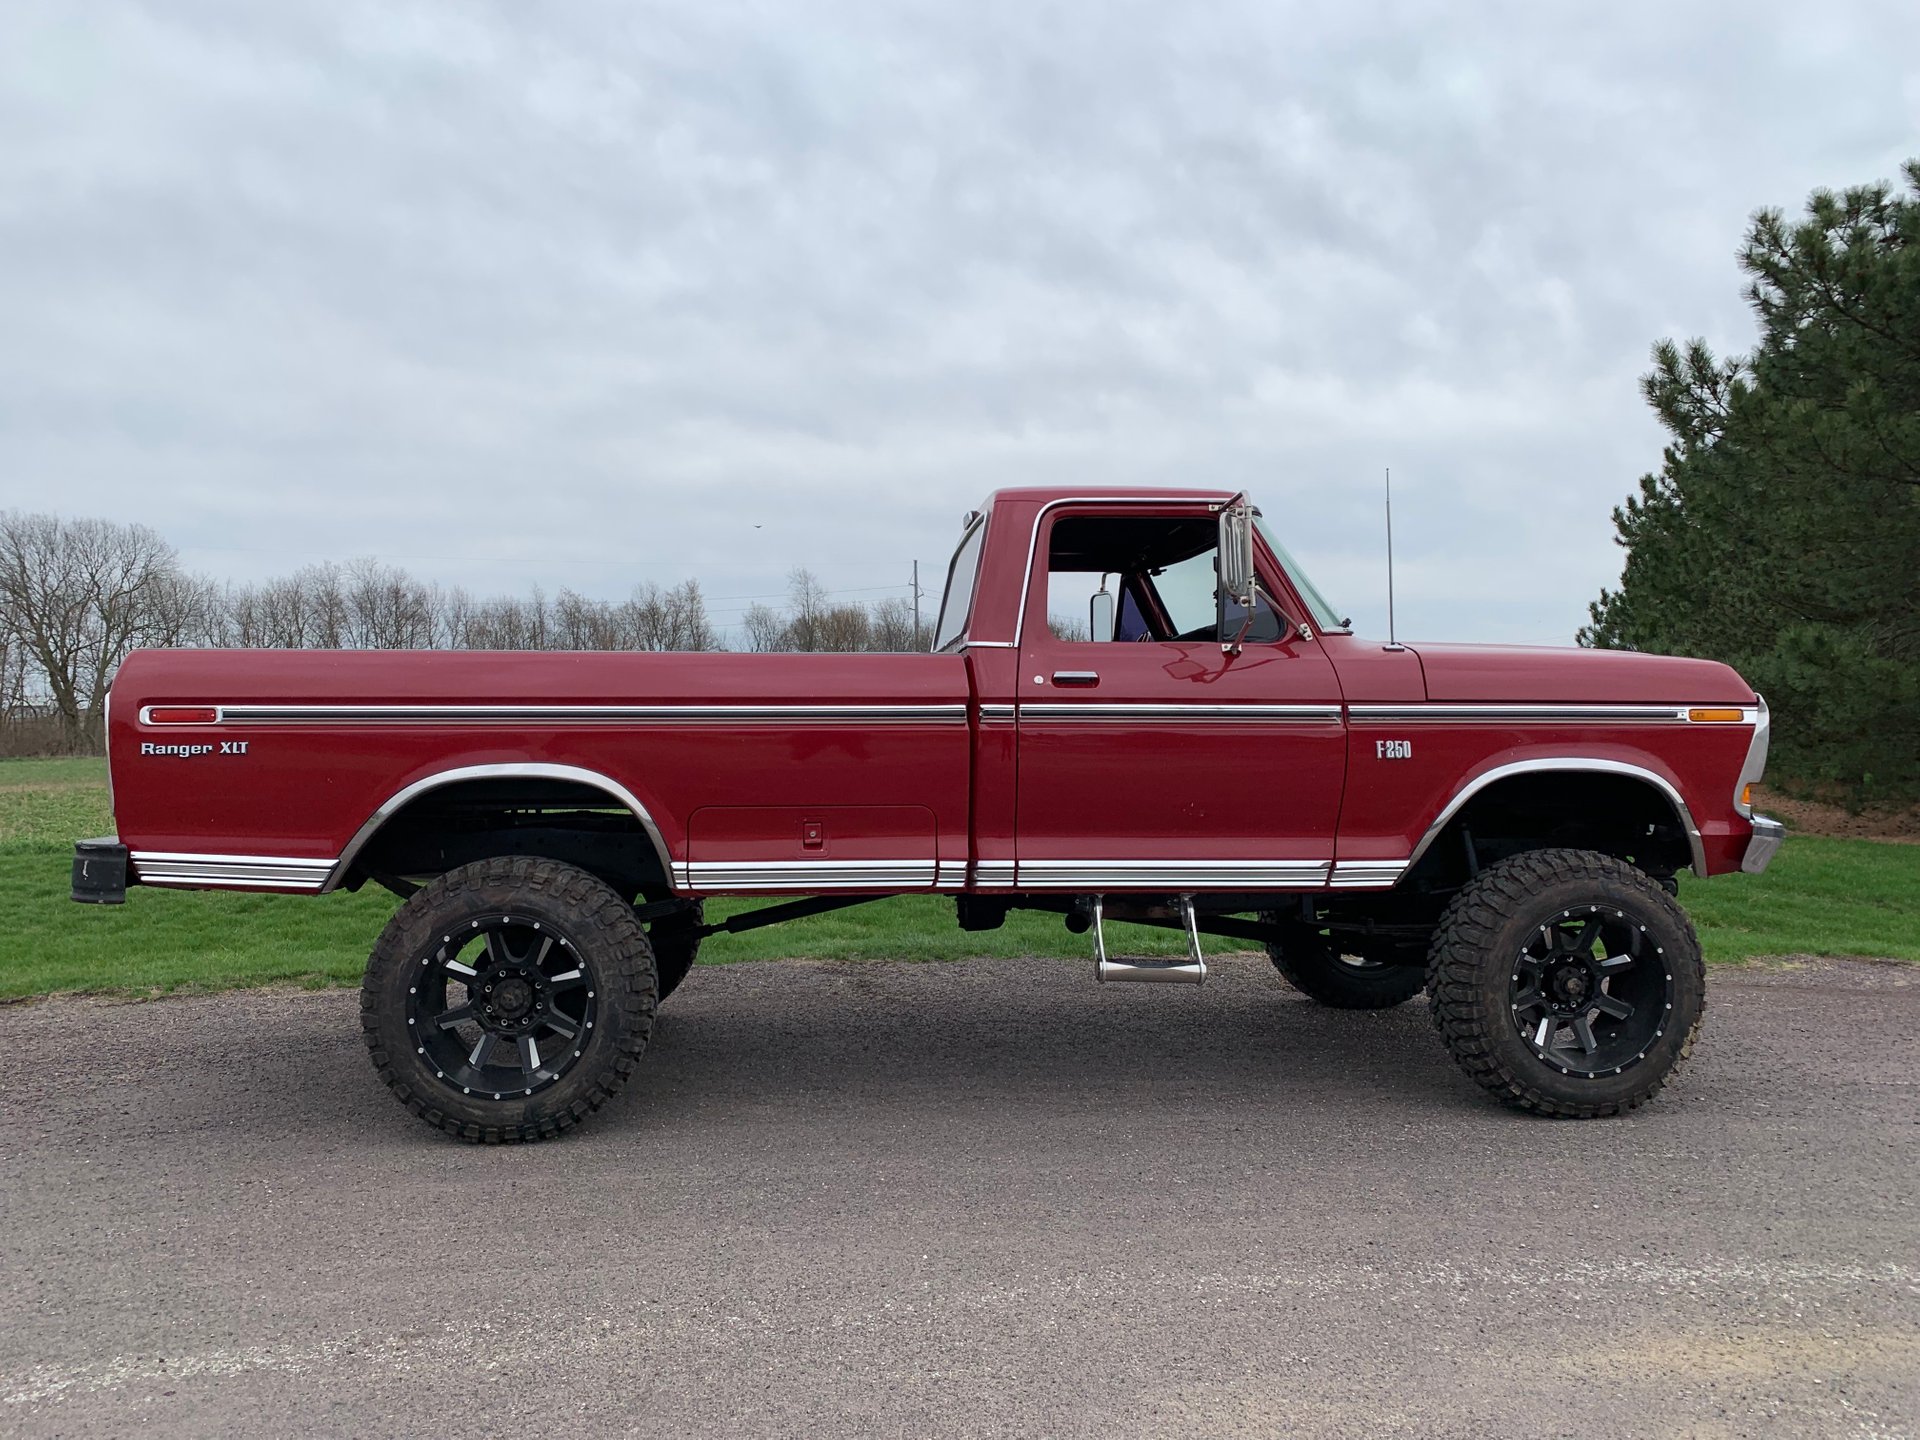 1976 ford f250